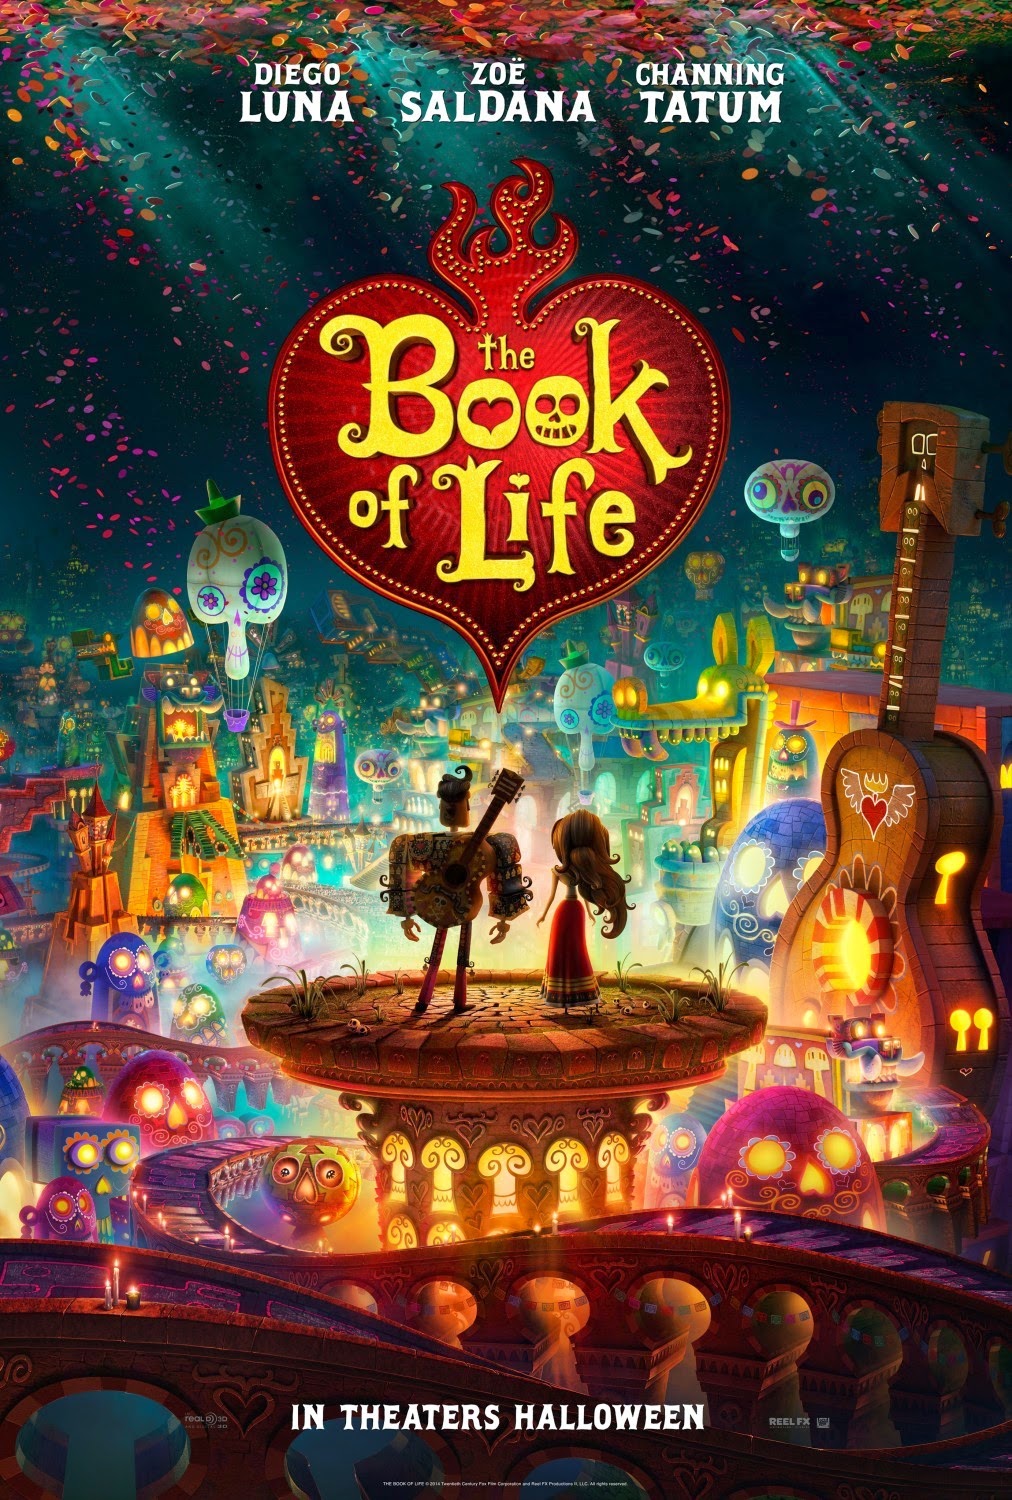 YJL's movie reviews: Movie Review: The Book of Life